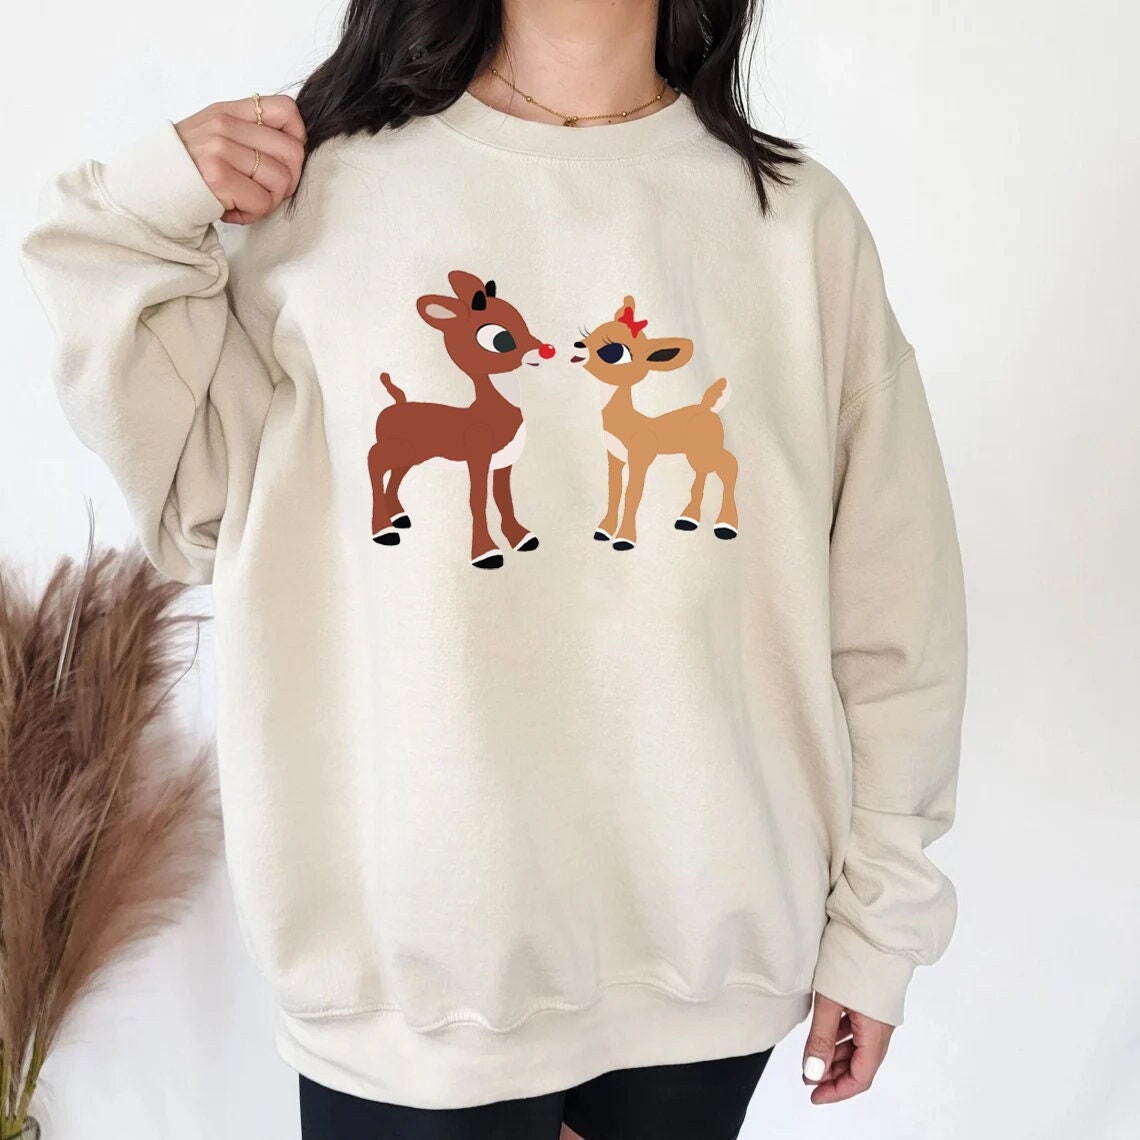 Discover Rudolph and Clarice Sweatshirt, Rudolph Red Nosed Christmas Sweatshirt Sweatshirt